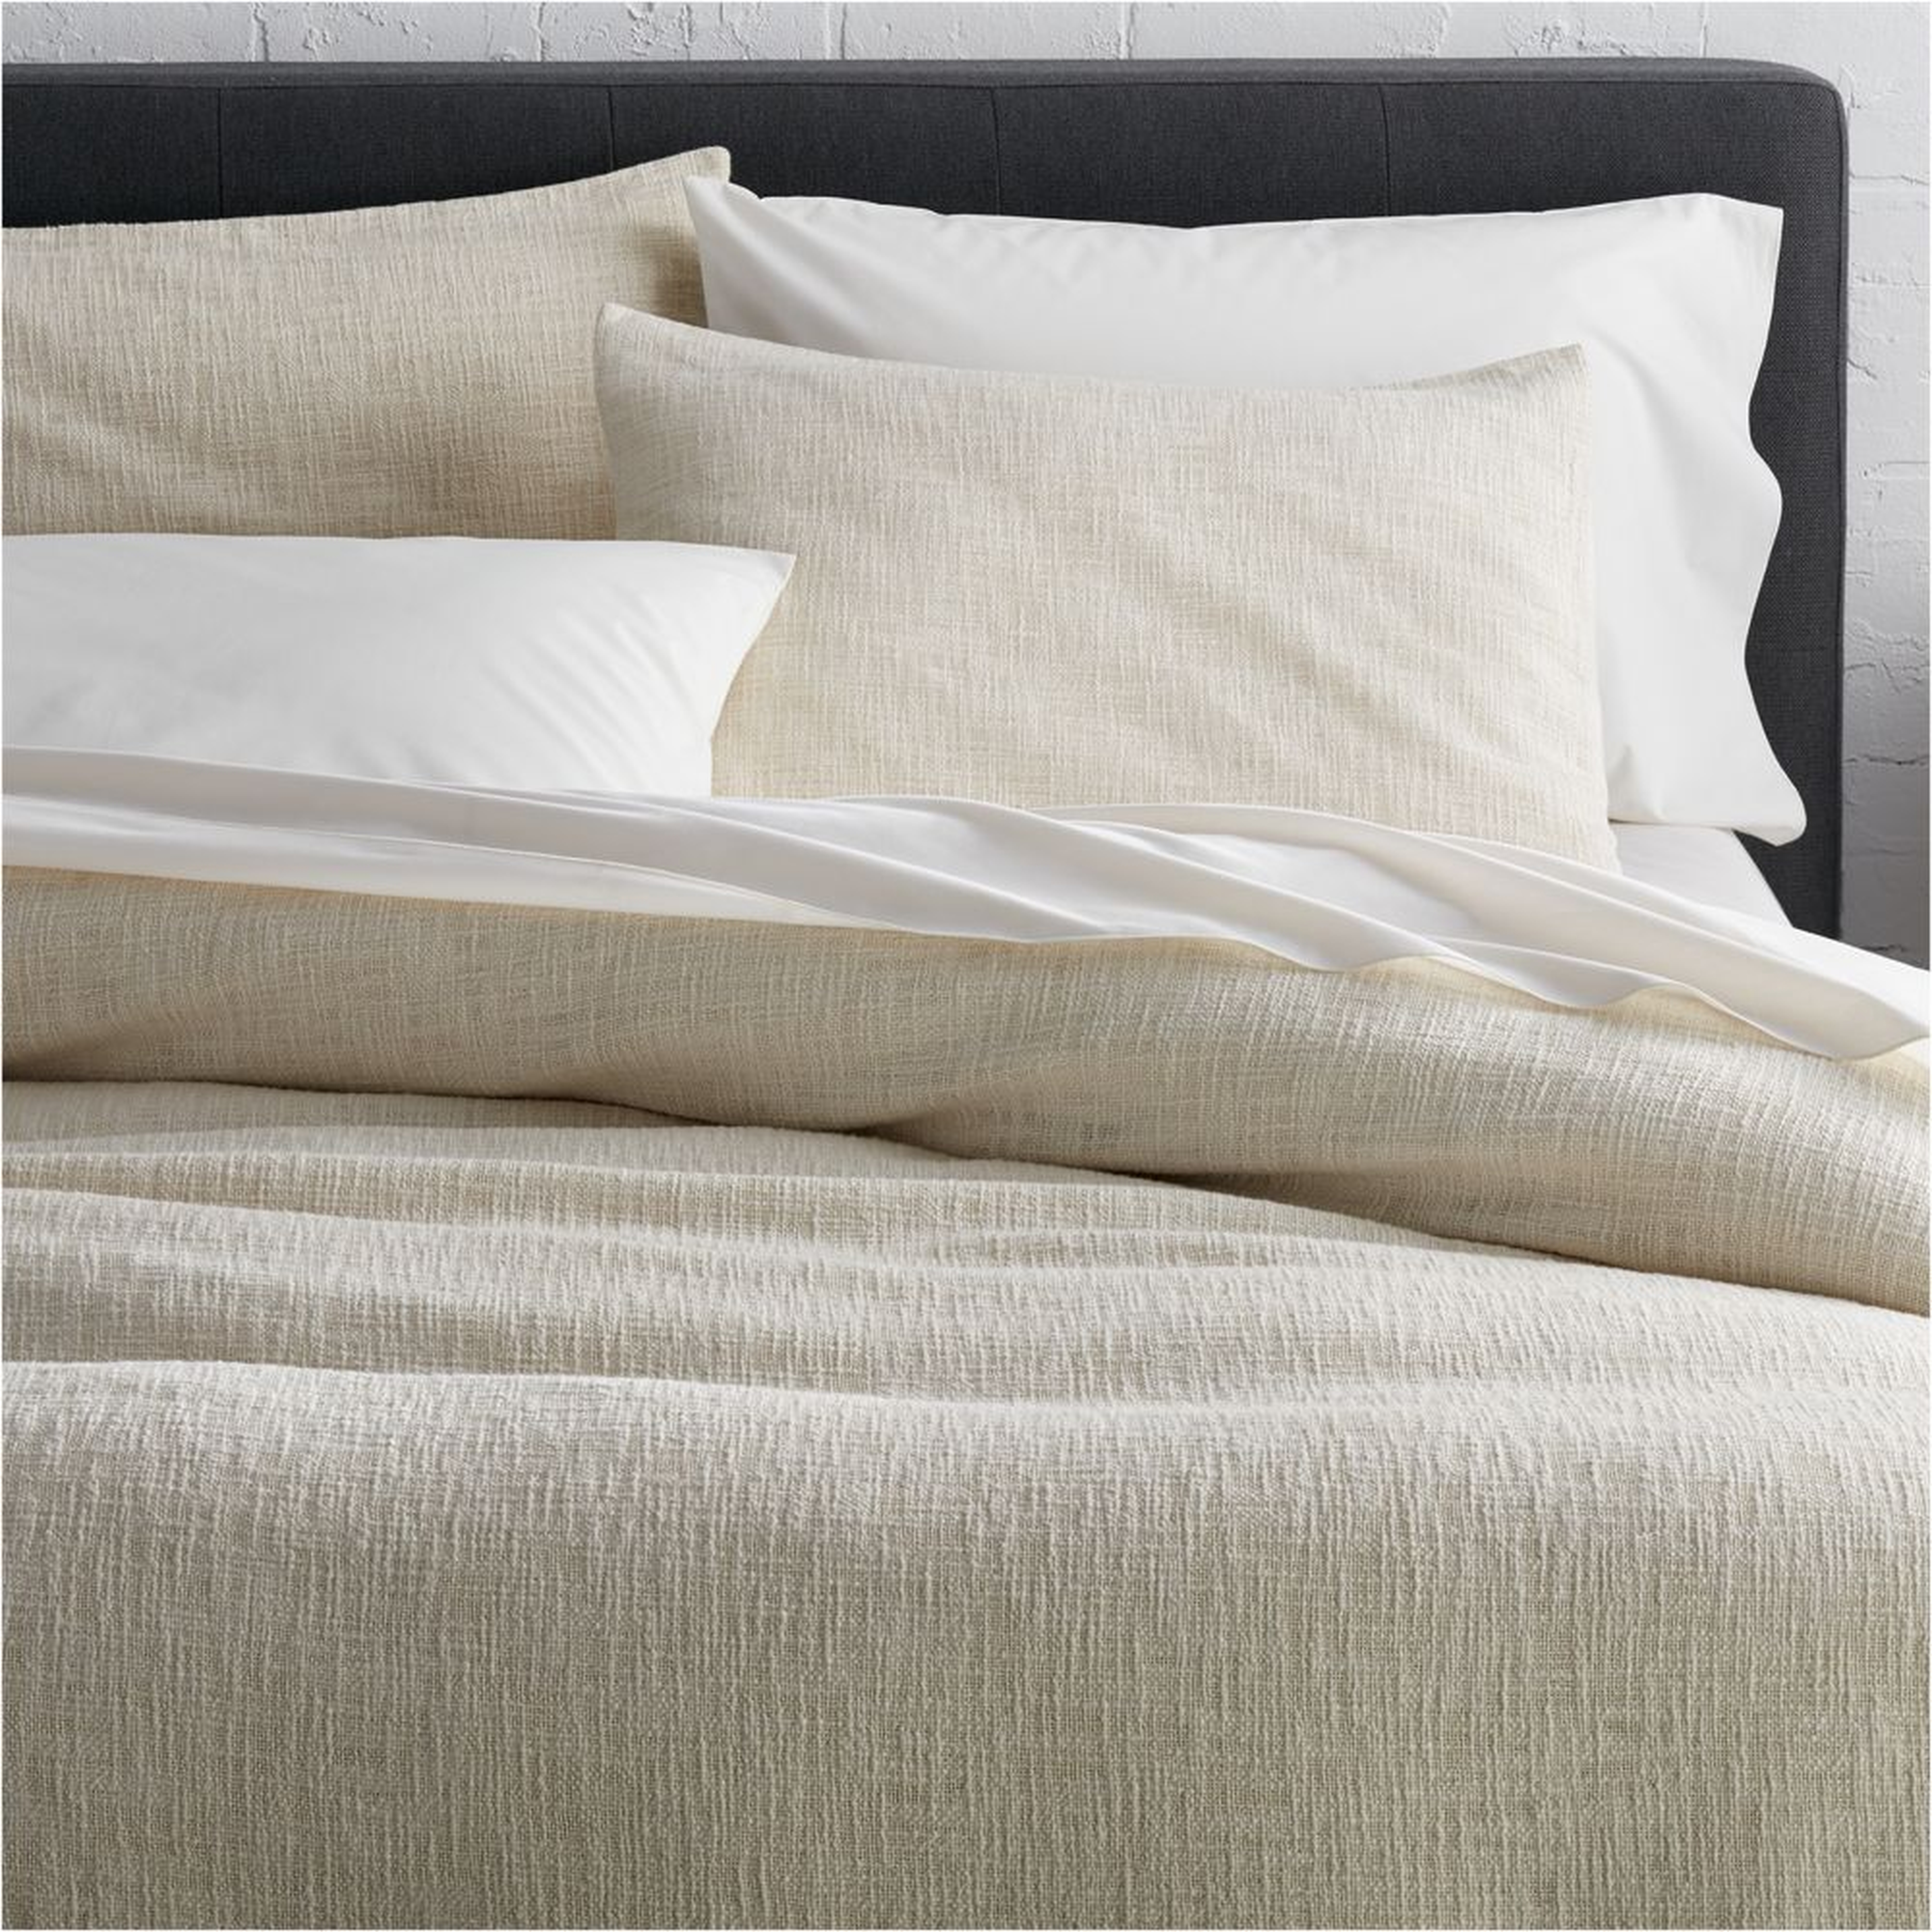 Lindstrom Ivory Full/Queen Duvet Cover - Crate and Barrel